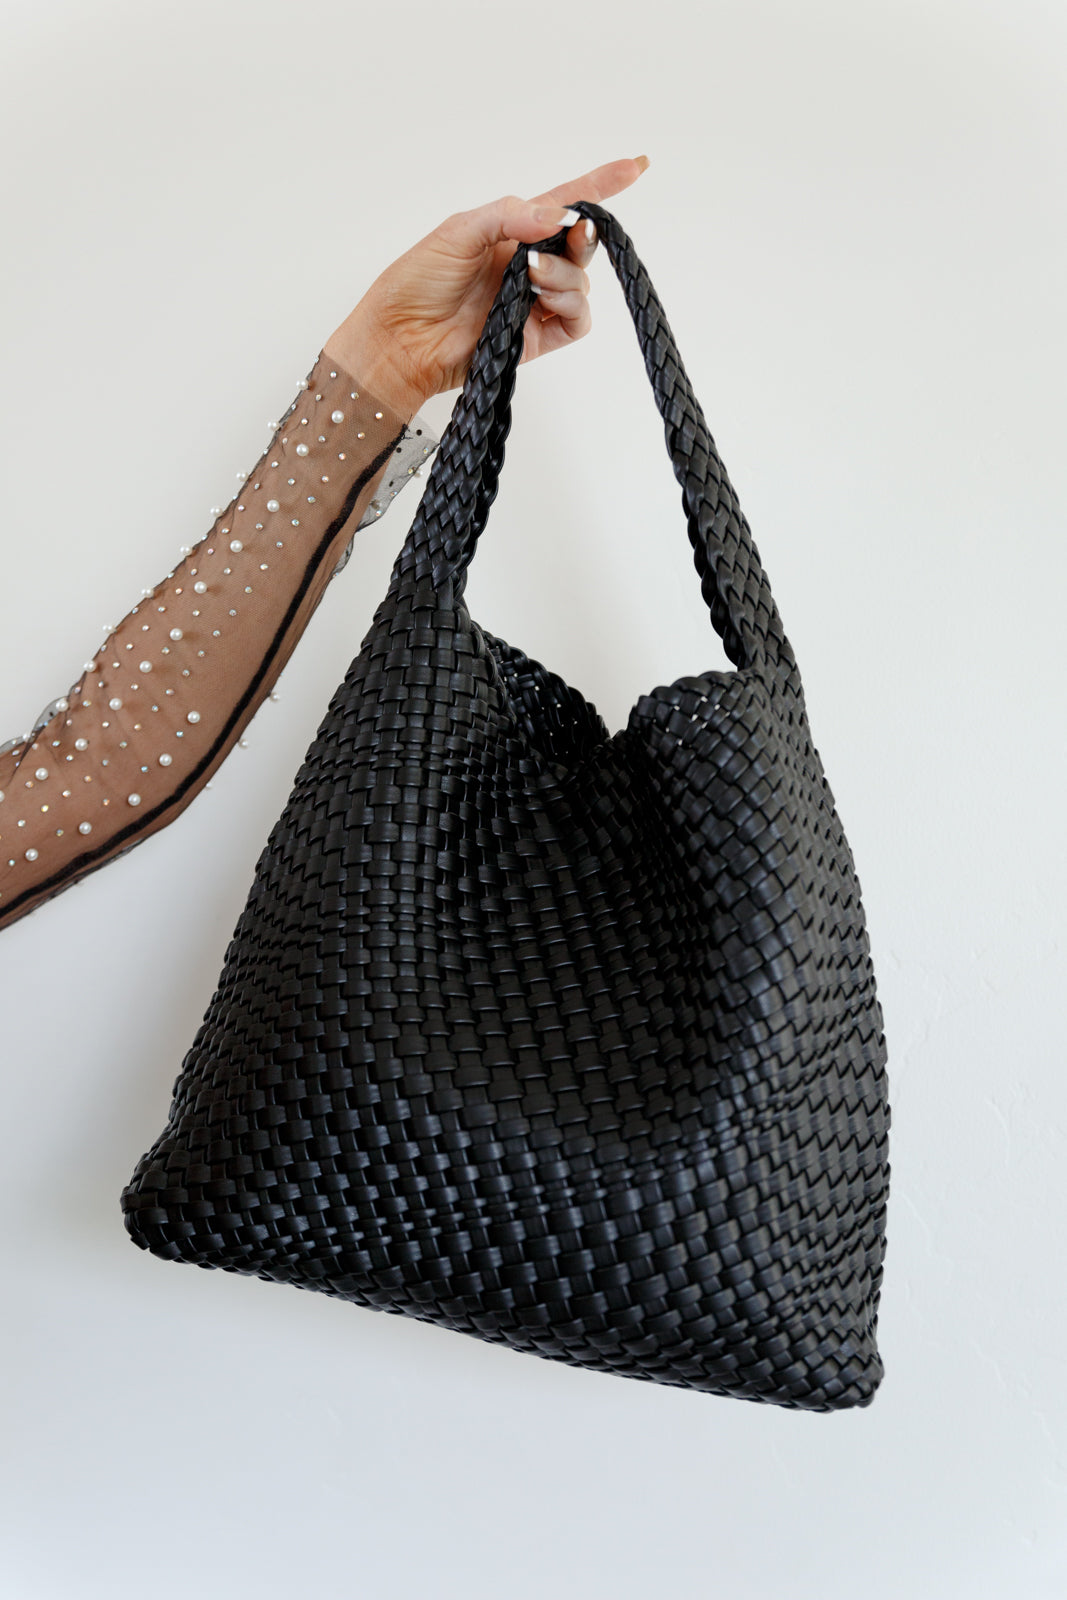 Woven and Worn Tote in Black - Southern Divas Boutique